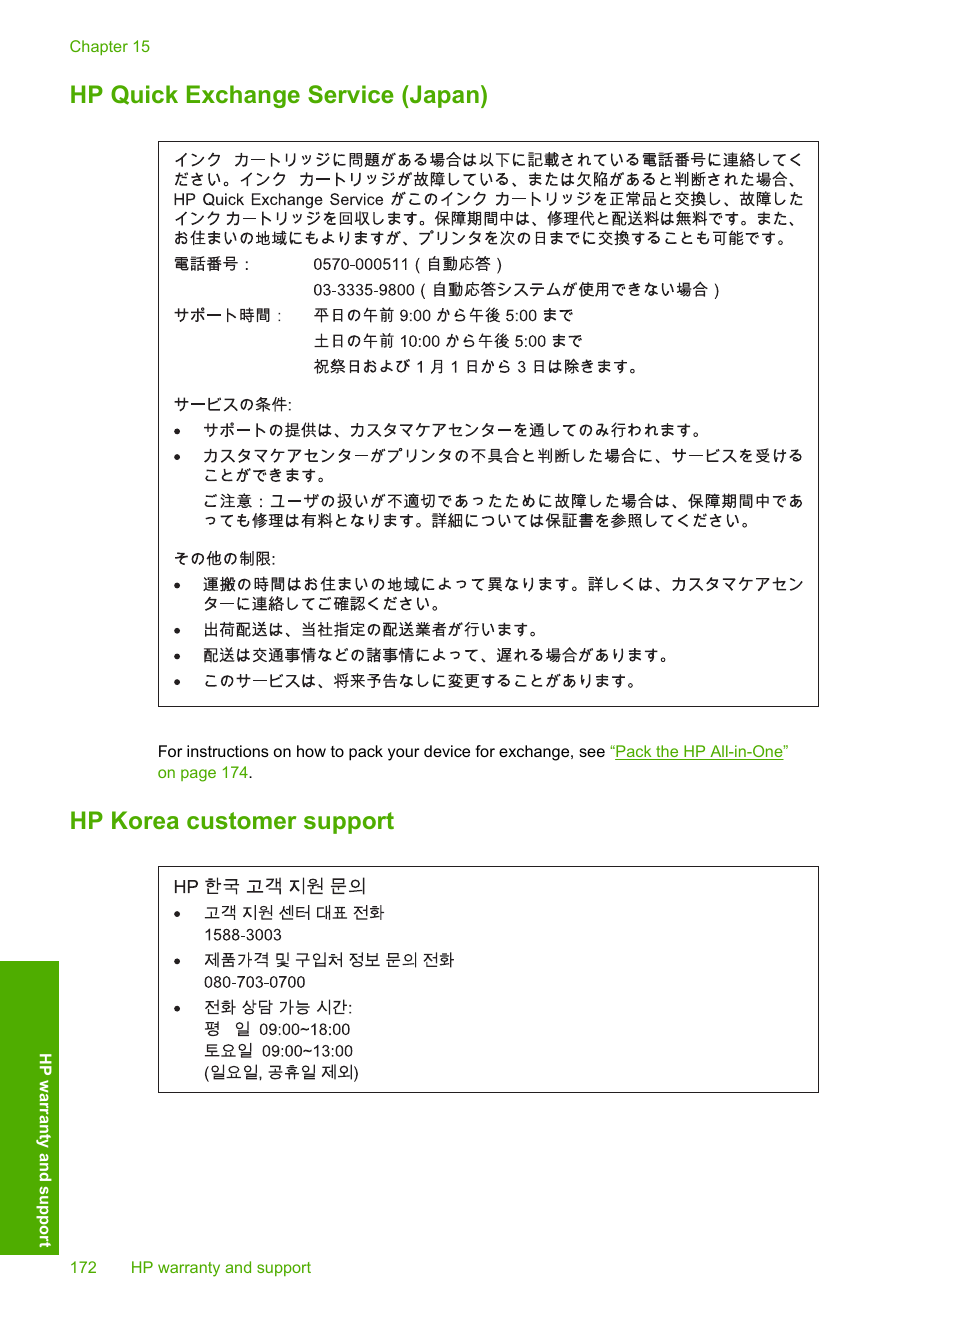 Hp quick exchange service (japan), Hp korea customer support | HP Photosmart  C6280 All-in-One Printer User Manual | Page 173 / 189 | Original mode